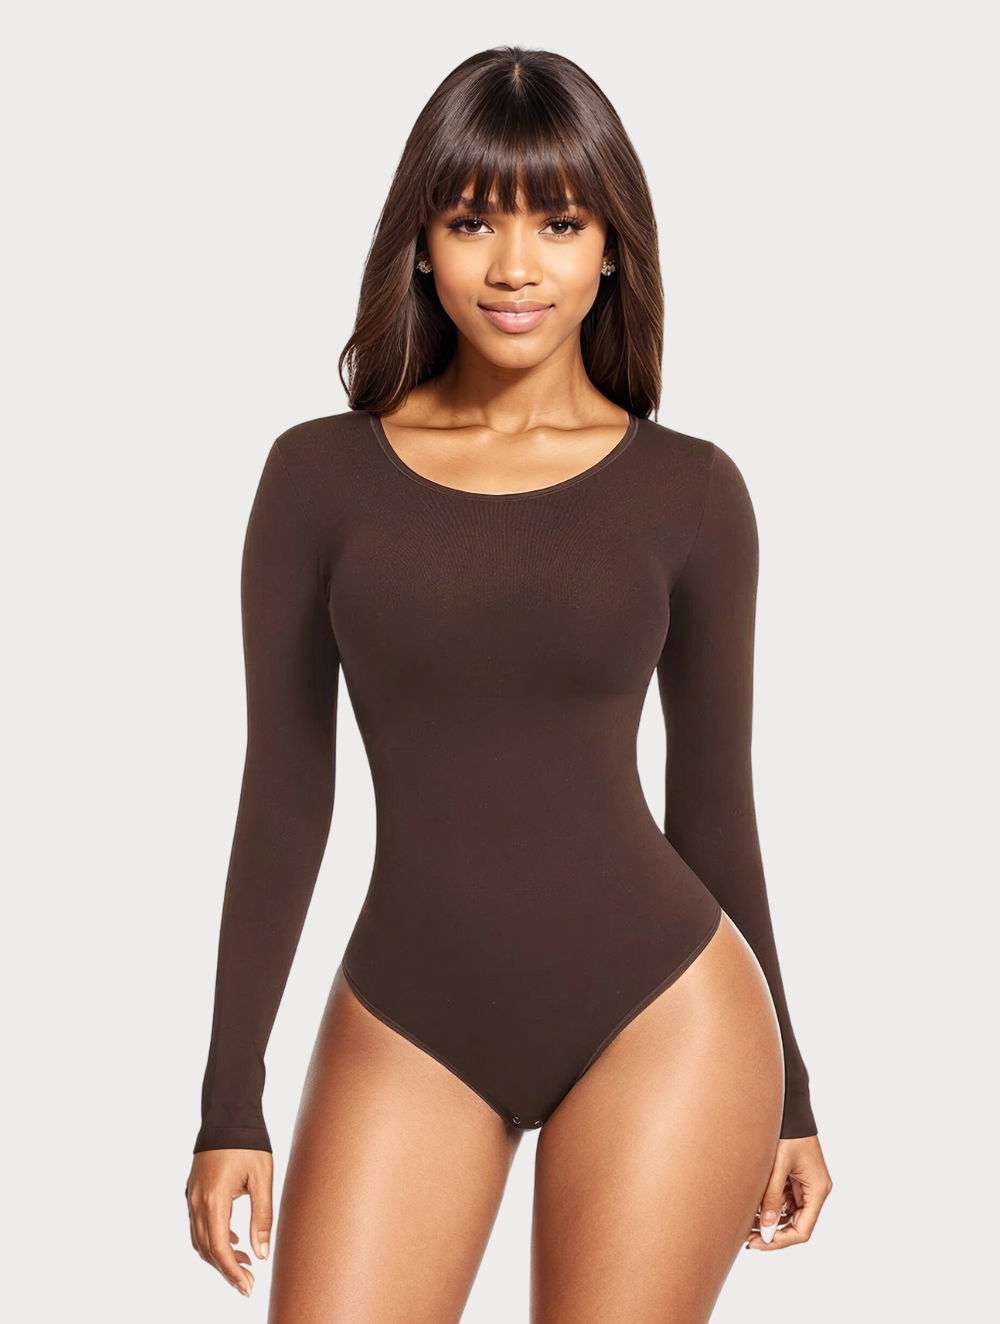 Shapewear in every shade 🫶🏽 Core-Control Slimsuit come in a